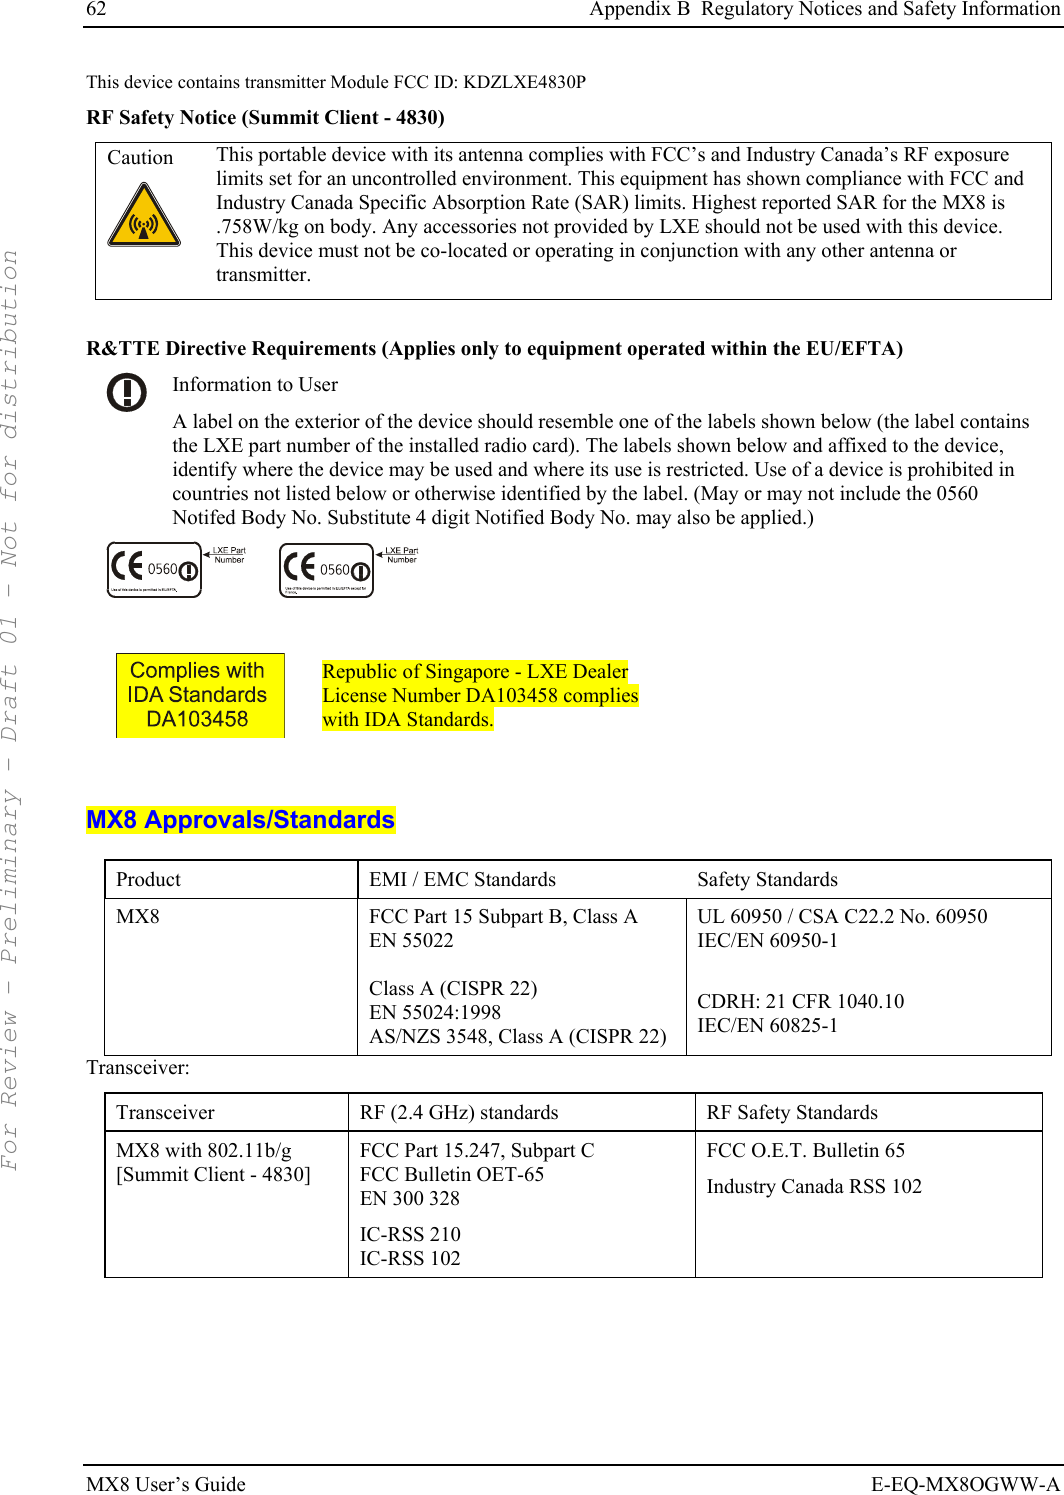 62  Appendix B  Regulatory Notices and Safety Information MX8 User’s Guide  E-EQ-MX8OGWW-A This device contains transmitter Module FCC ID: KDZLXE4830P RF Safety Notice (Summit Client - 4830) Caution   This portable device with its antenna complies with FCC’s and Industry Canada’s RF exposure limits set for an uncontrolled environment. This equipment has shown compliance with FCC and Industry Canada Specific Absorption Rate (SAR) limits. Highest reported SAR for the MX8 is .758W/kg on body. Any accessories not provided by LXE should not be used with this device. This device must not be co-located or operating in conjunction with any other antenna or transmitter.  R&amp;TTE Directive Requirements (Applies only to equipment operated within the EU/EFTA)  Information to User A label on the exterior of the device should resemble one of the labels shown below (the label contains the LXE part number of the installed radio card). The labels shown below and affixed to the device, identify where the device may be used and where its use is restricted. Use of a device is prohibited in countries not listed below or otherwise identified by the label. (May or may not include the 0560 Notifed Body No. Substitute 4 digit Notified Body No. may also be applied.)          Republic of Singapore - LXE Dealer License Number DA103458 complies with IDA Standards.  MX8 Approvals/Standards  Product  EMI / EMC Standards   Safety Standards MX8  FCC Part 15 Subpart B, Class A EN 55022  Class A (CISPR 22) EN 55024:1998 AS/NZS 3548, Class A (CISPR 22) UL 60950 / CSA C22.2 No. 60950 IEC/EN 60950-1  CDRH: 21 CFR 1040.10 IEC/EN 60825-1 Transceiver: Transceiver  RF (2.4 GHz) standards  RF Safety Standards MX8 with 802.11b/g [Summit Client - 4830] FCC Part 15.247, Subpart C FCC Bulletin OET-65 EN 300 328 IC-RSS 210 IC-RSS 102 FCC O.E.T. Bulletin 65 Industry Canada RSS 102  For Review - Preliminary - Draft 01 - Not for distribution 